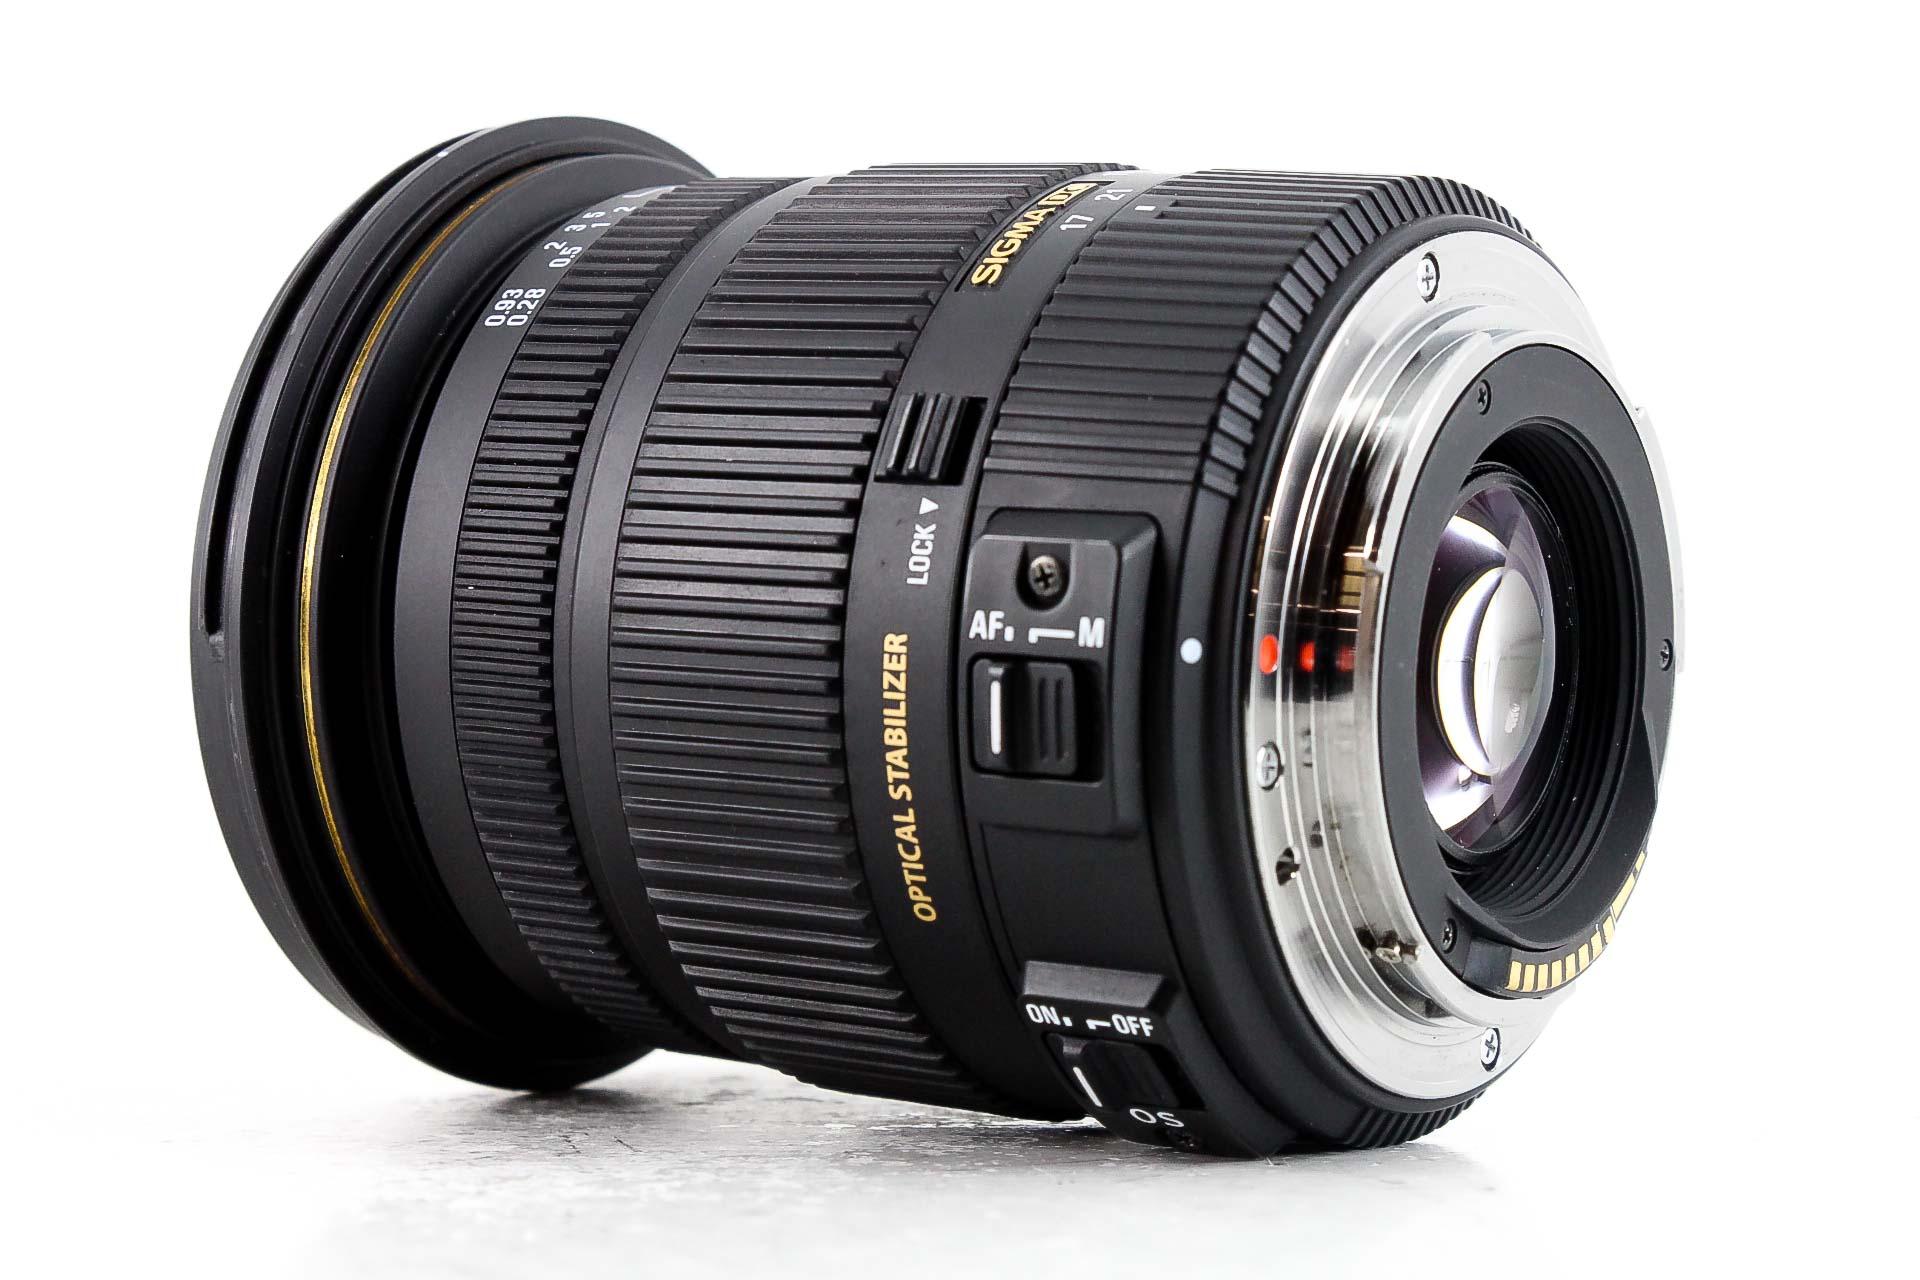 Sigma 17-50mm F2.8 EX DC OS HSM Lens for Canon Lenses and Cameras